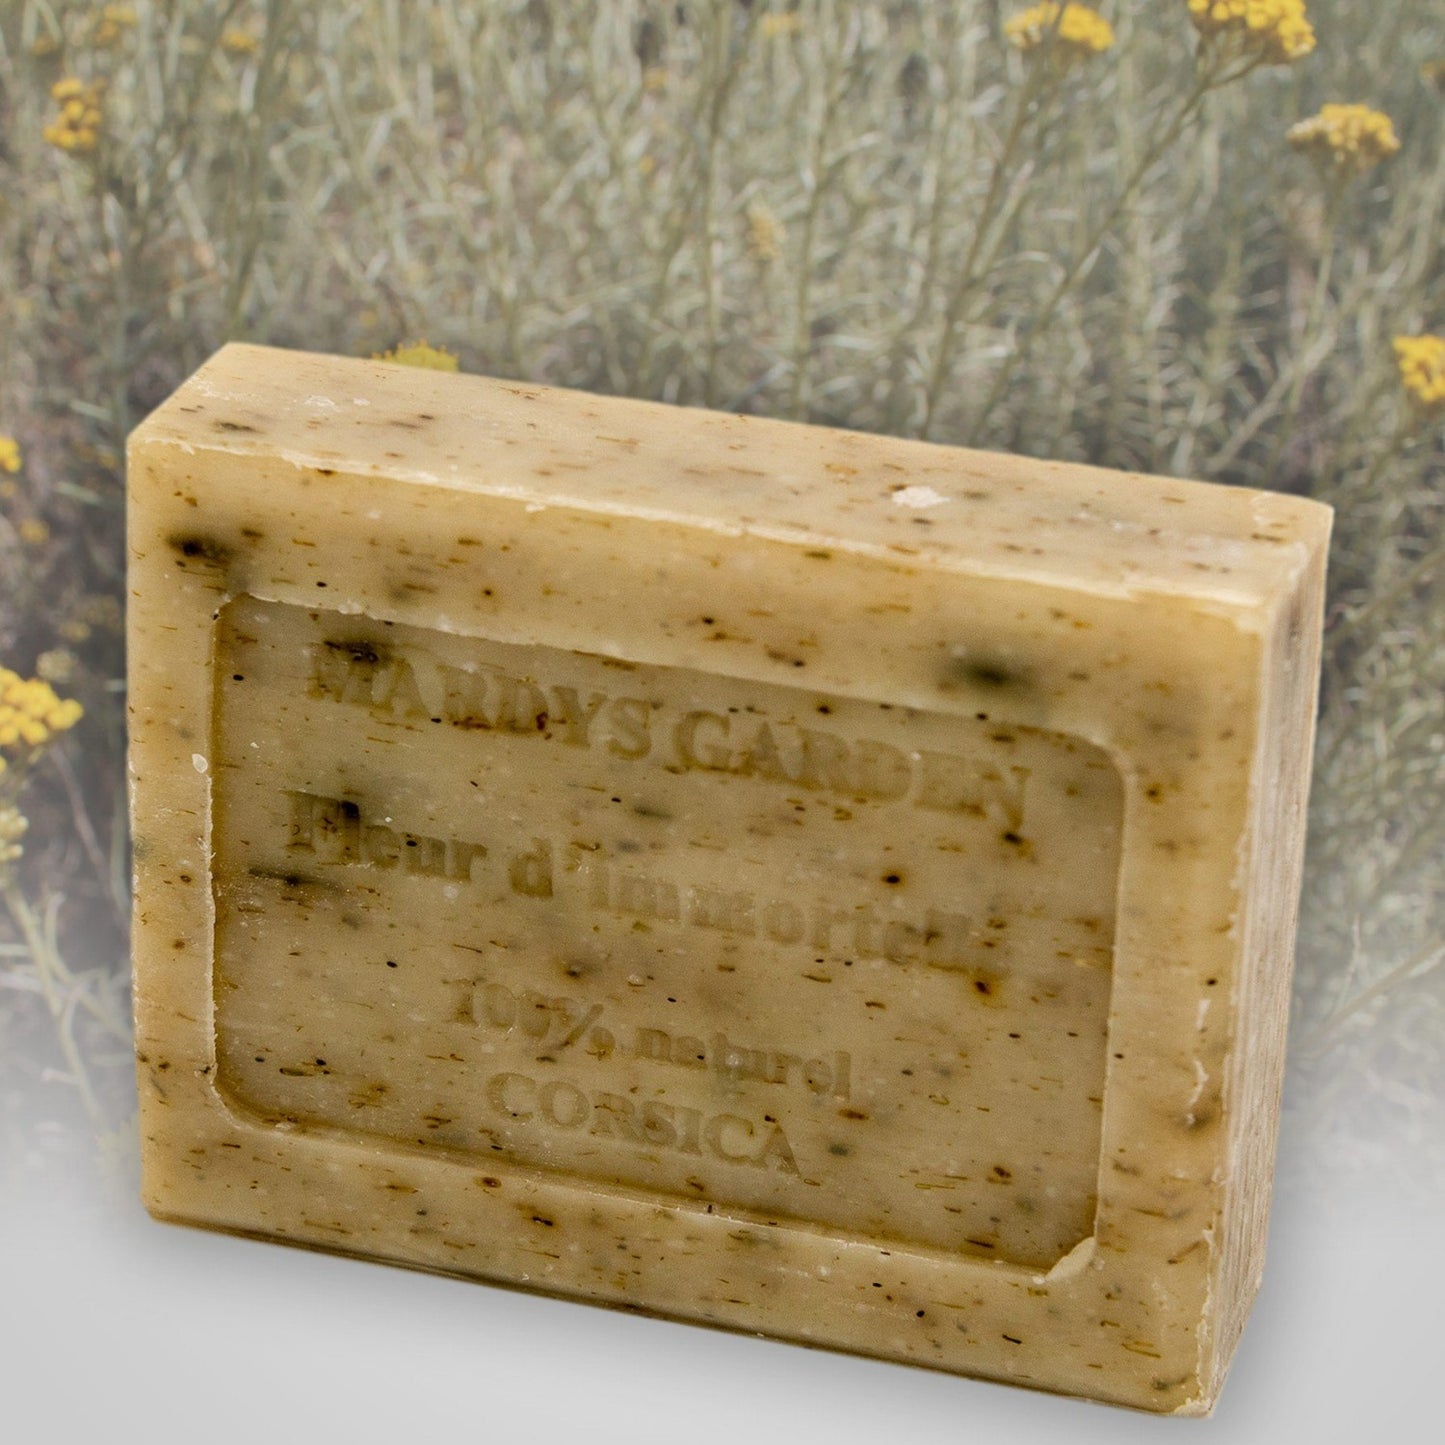 Immortelle Flowers Soap 100g. Exoliate skin. Scented with organic hydrosol and essential oil. All the properties of Corsican Immortelle for your skin. Natural skincare product. Gently clean, soothes and washes